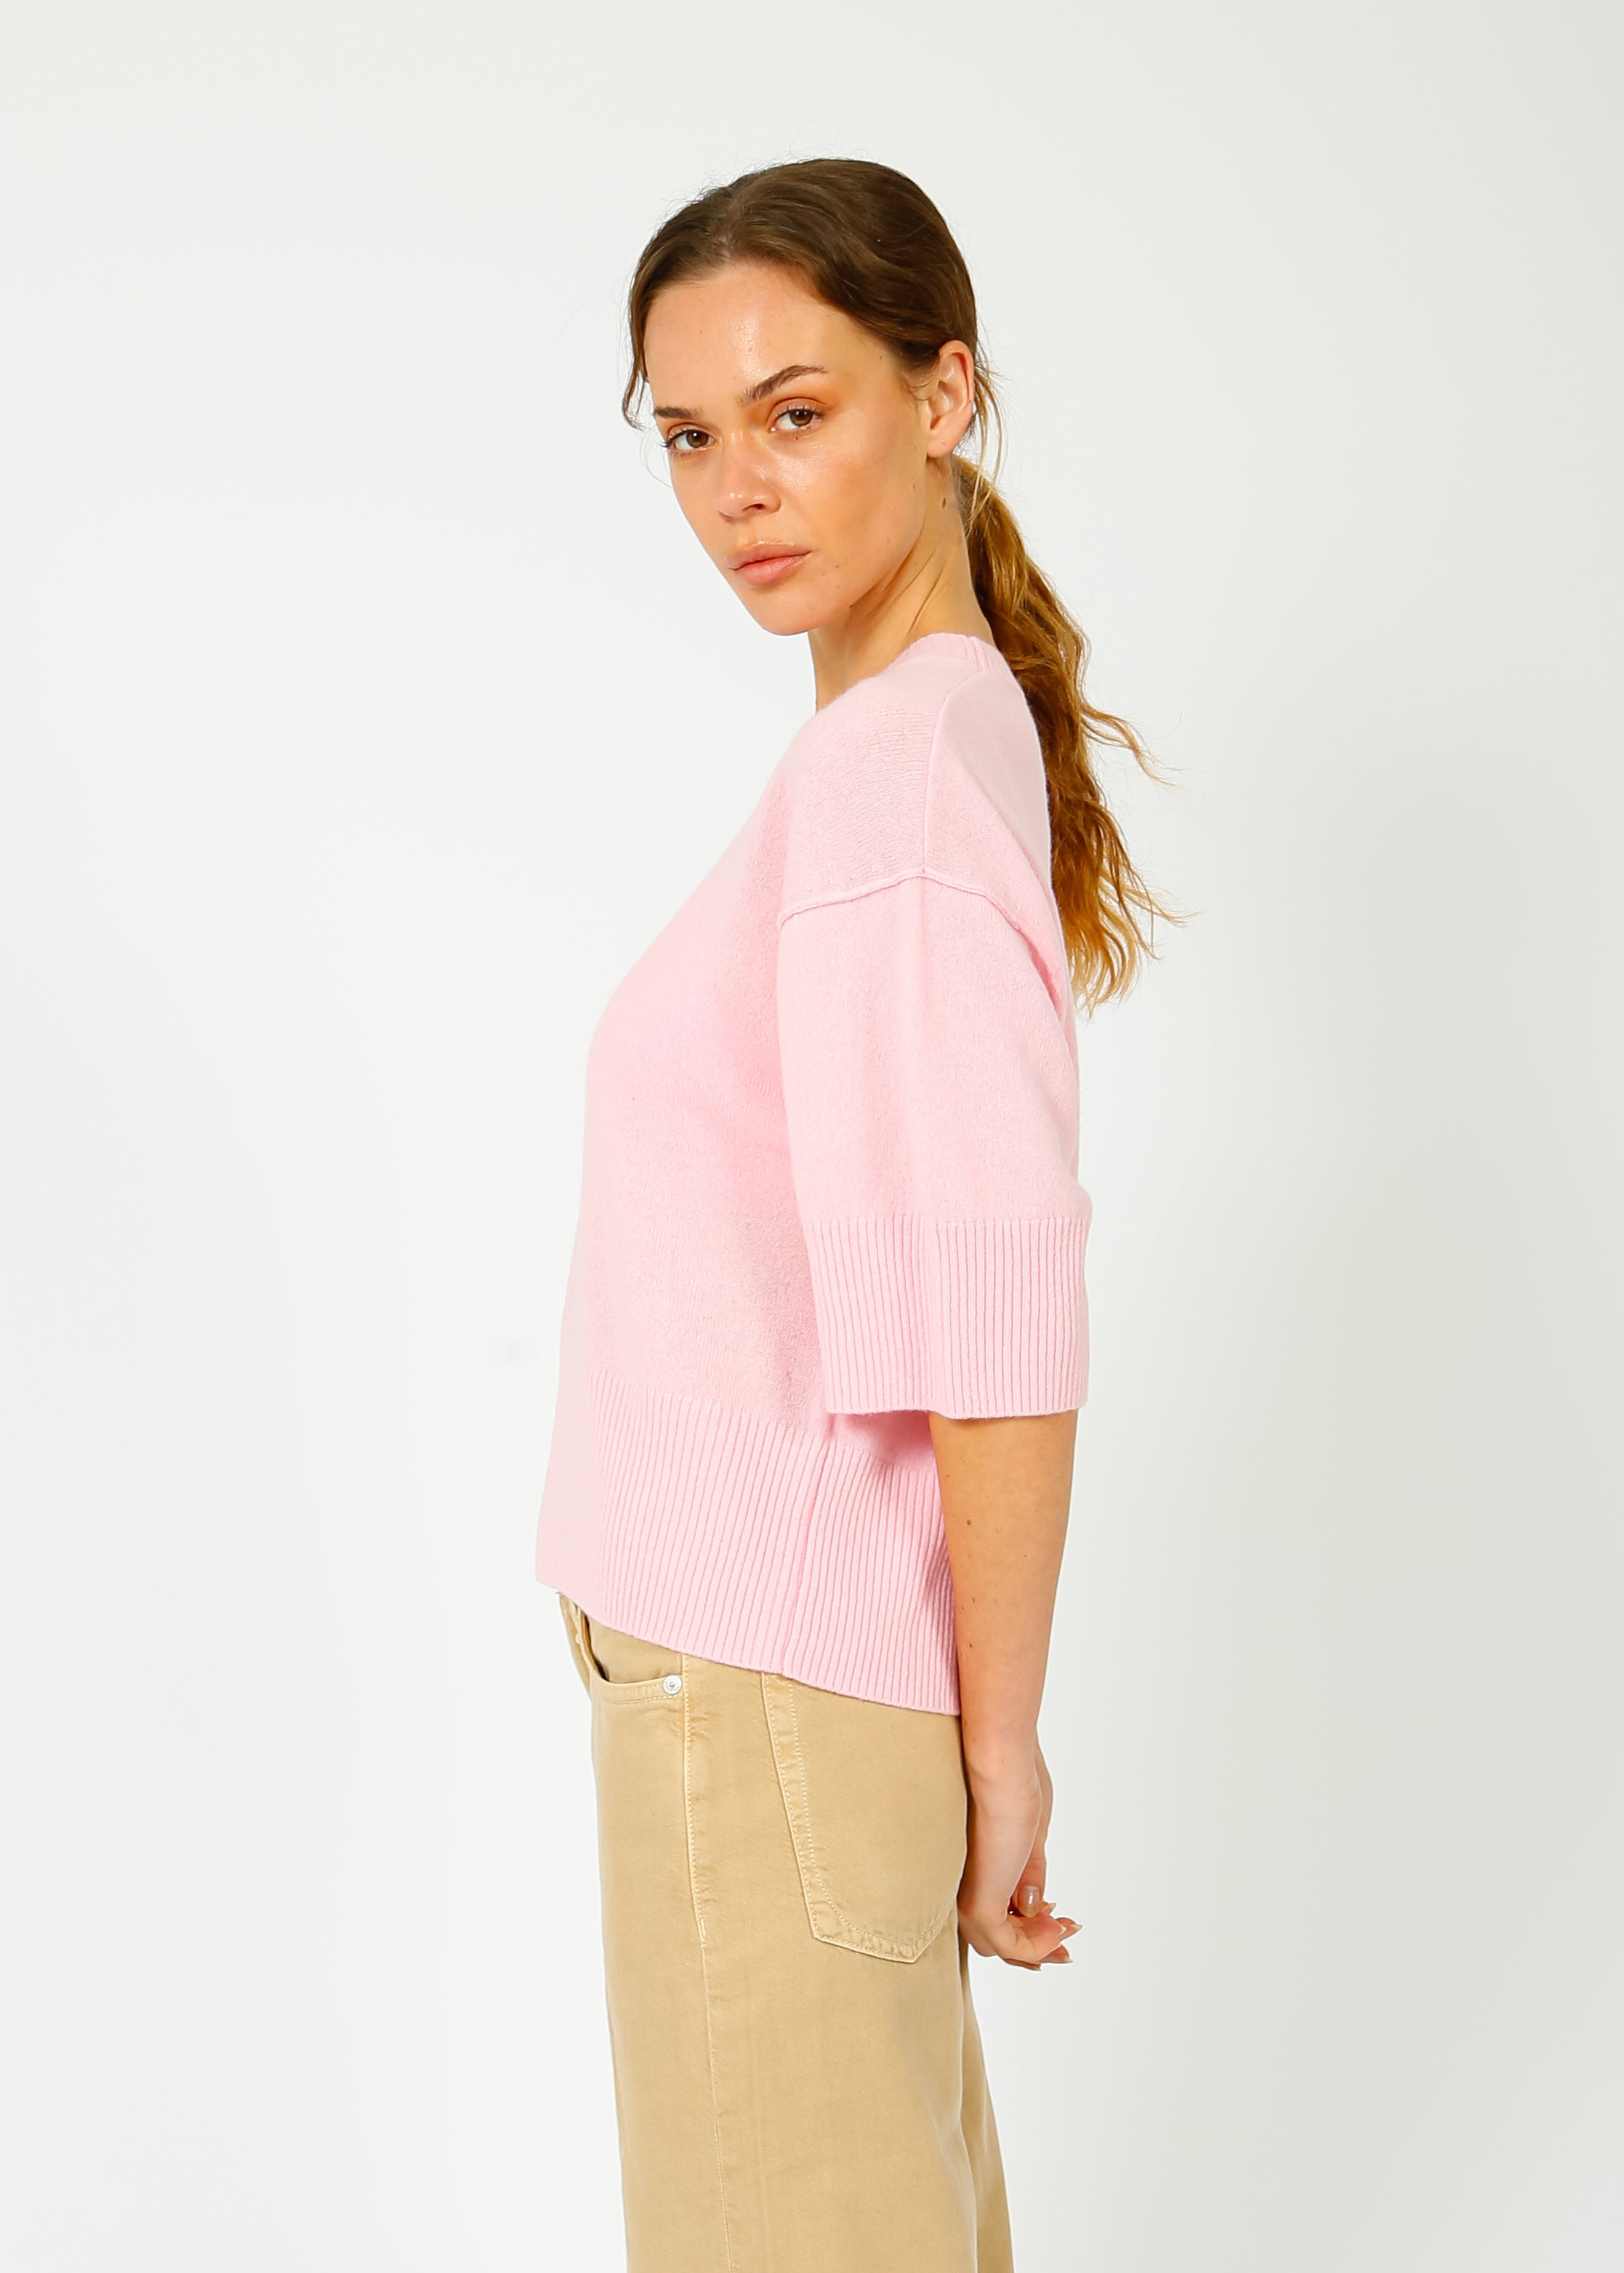 CRUSH Flamenco  Cashmere Mix Tee in Candy Floss